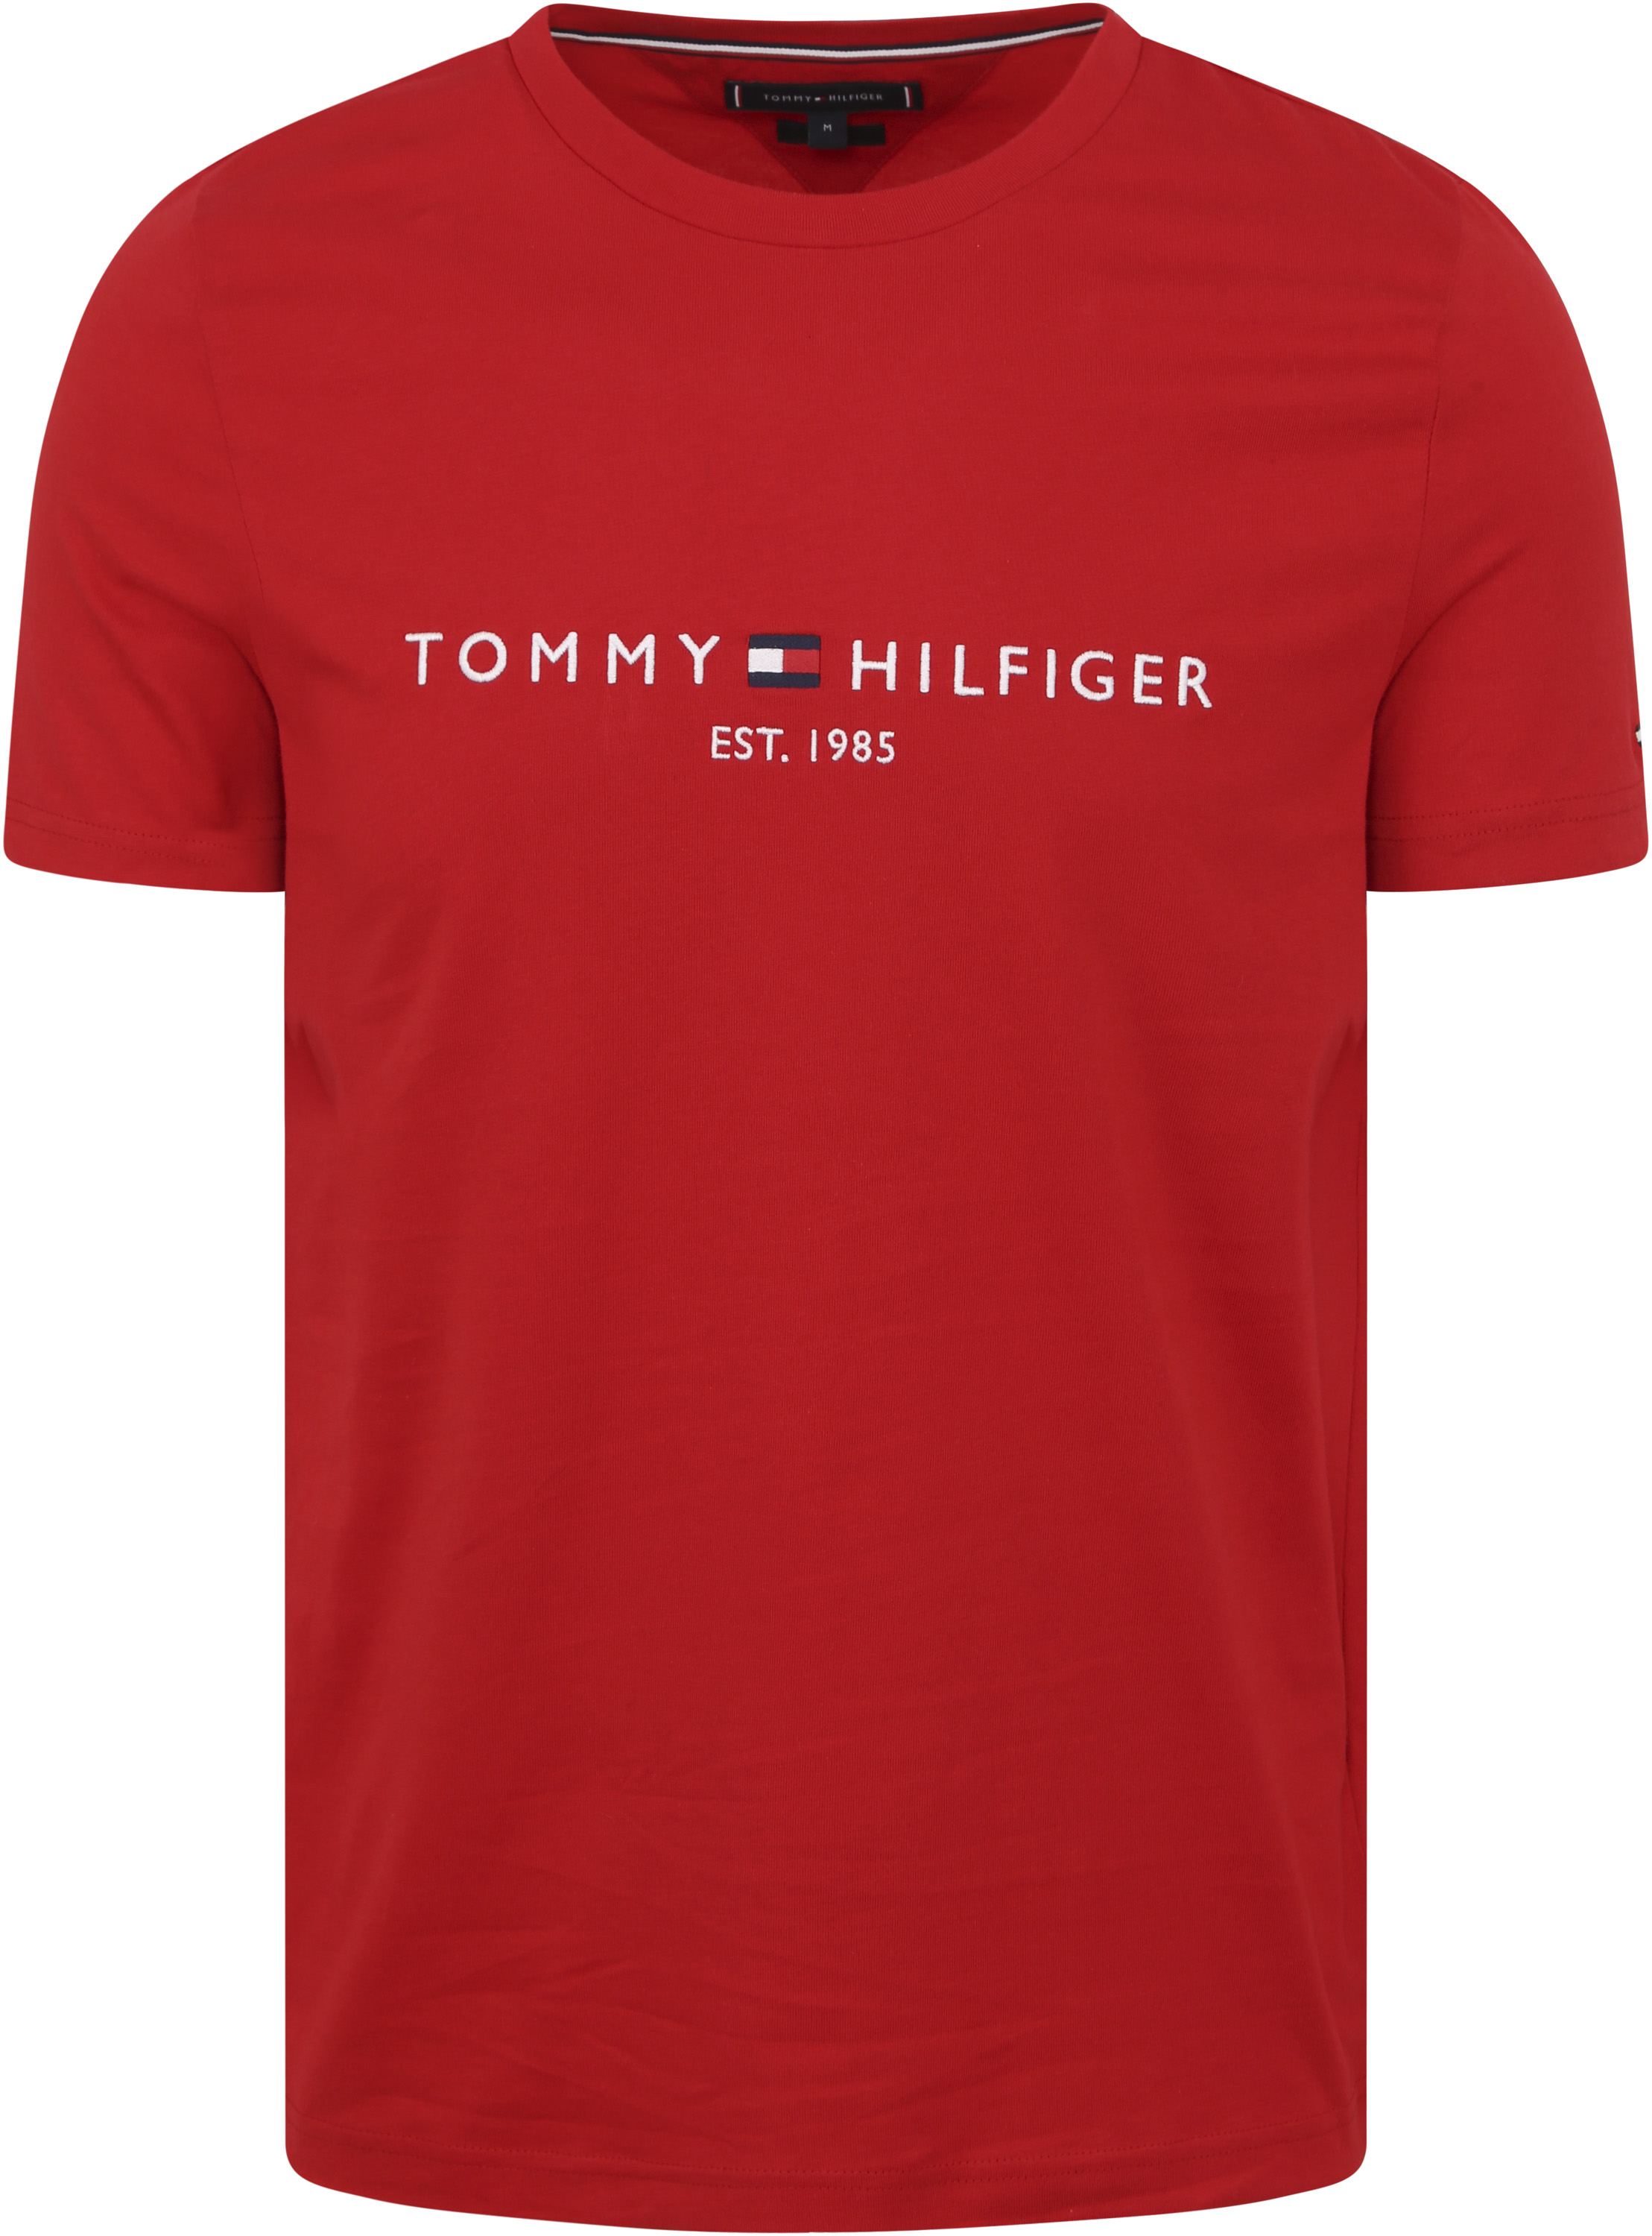 Tommy Hilfiger sizes & size chart information | Suitable